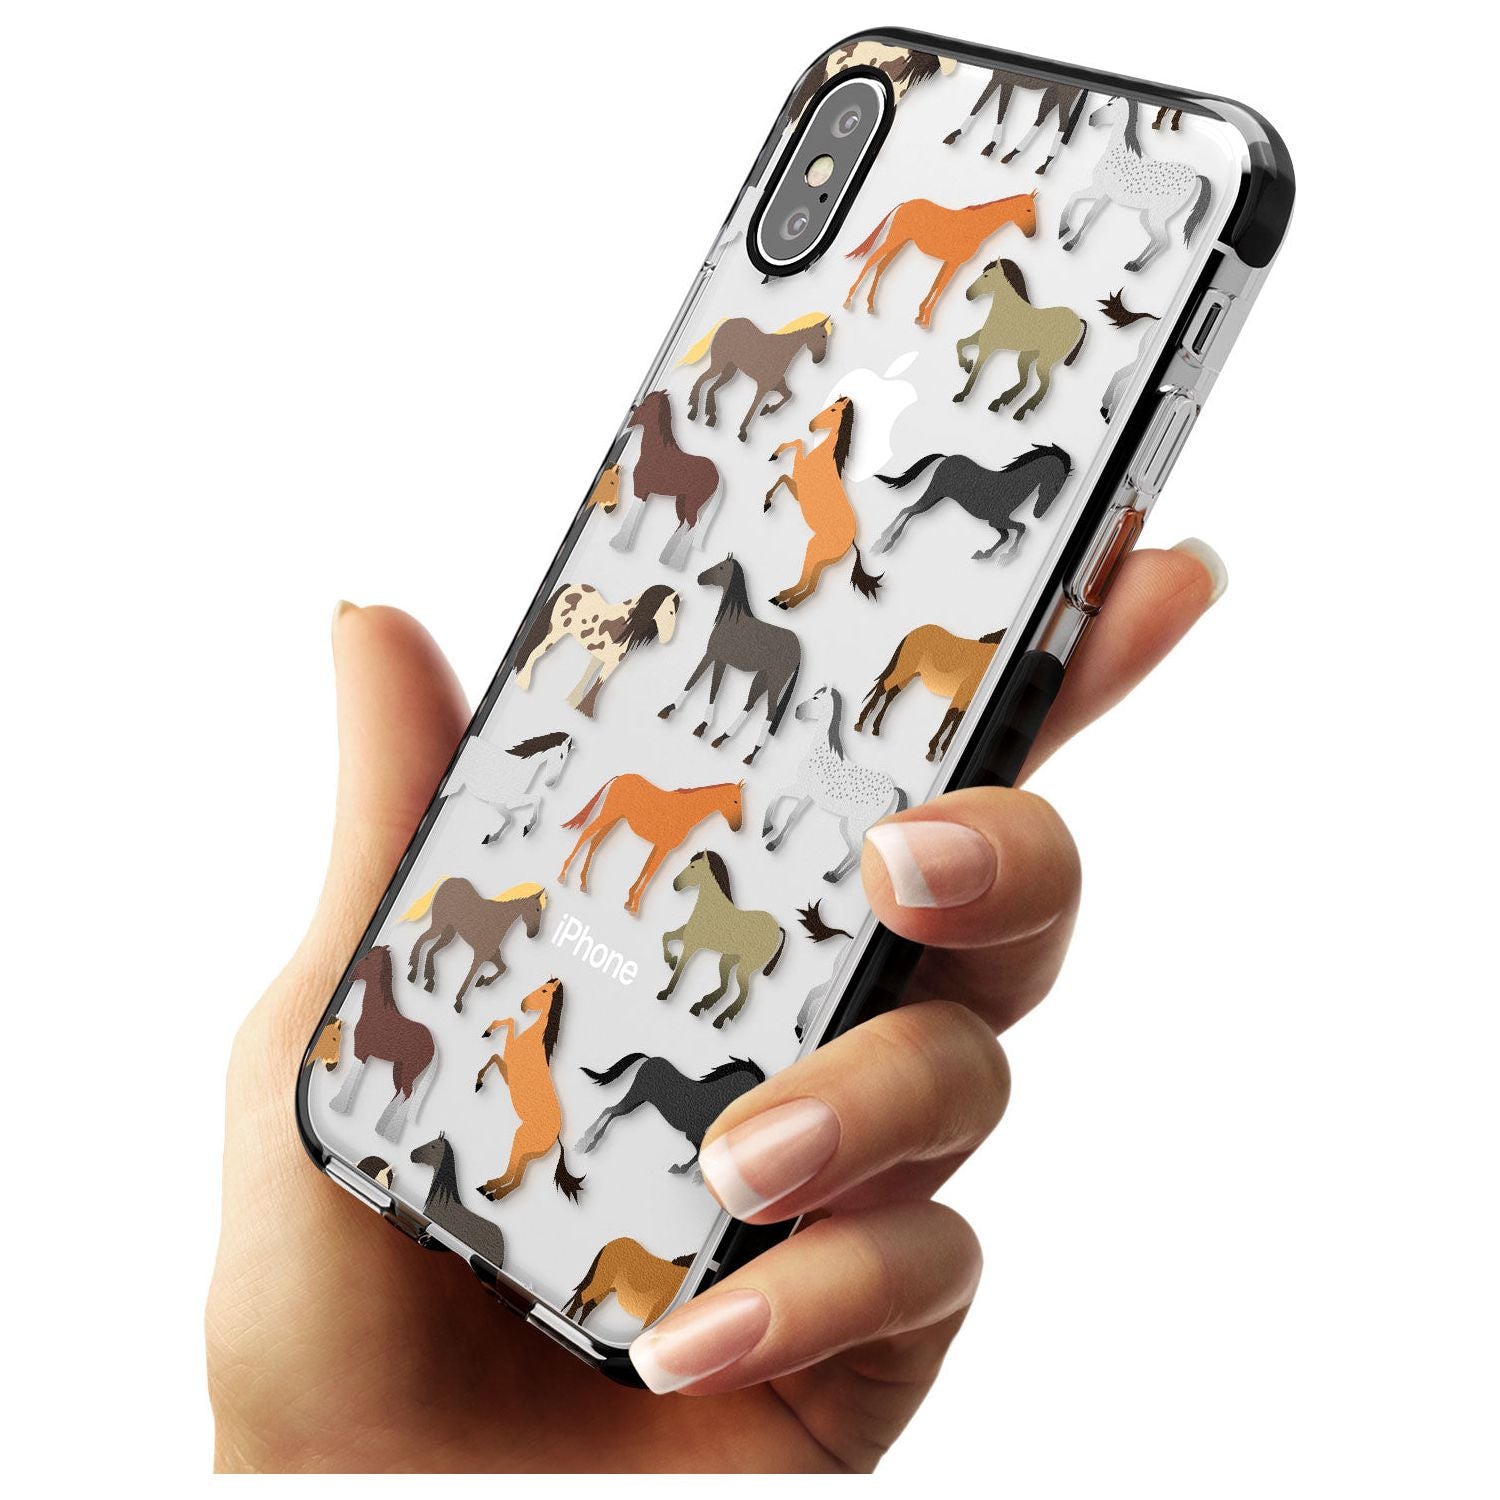 Horse Pattern Black Impact Phone Case for iPhone X XS Max XR